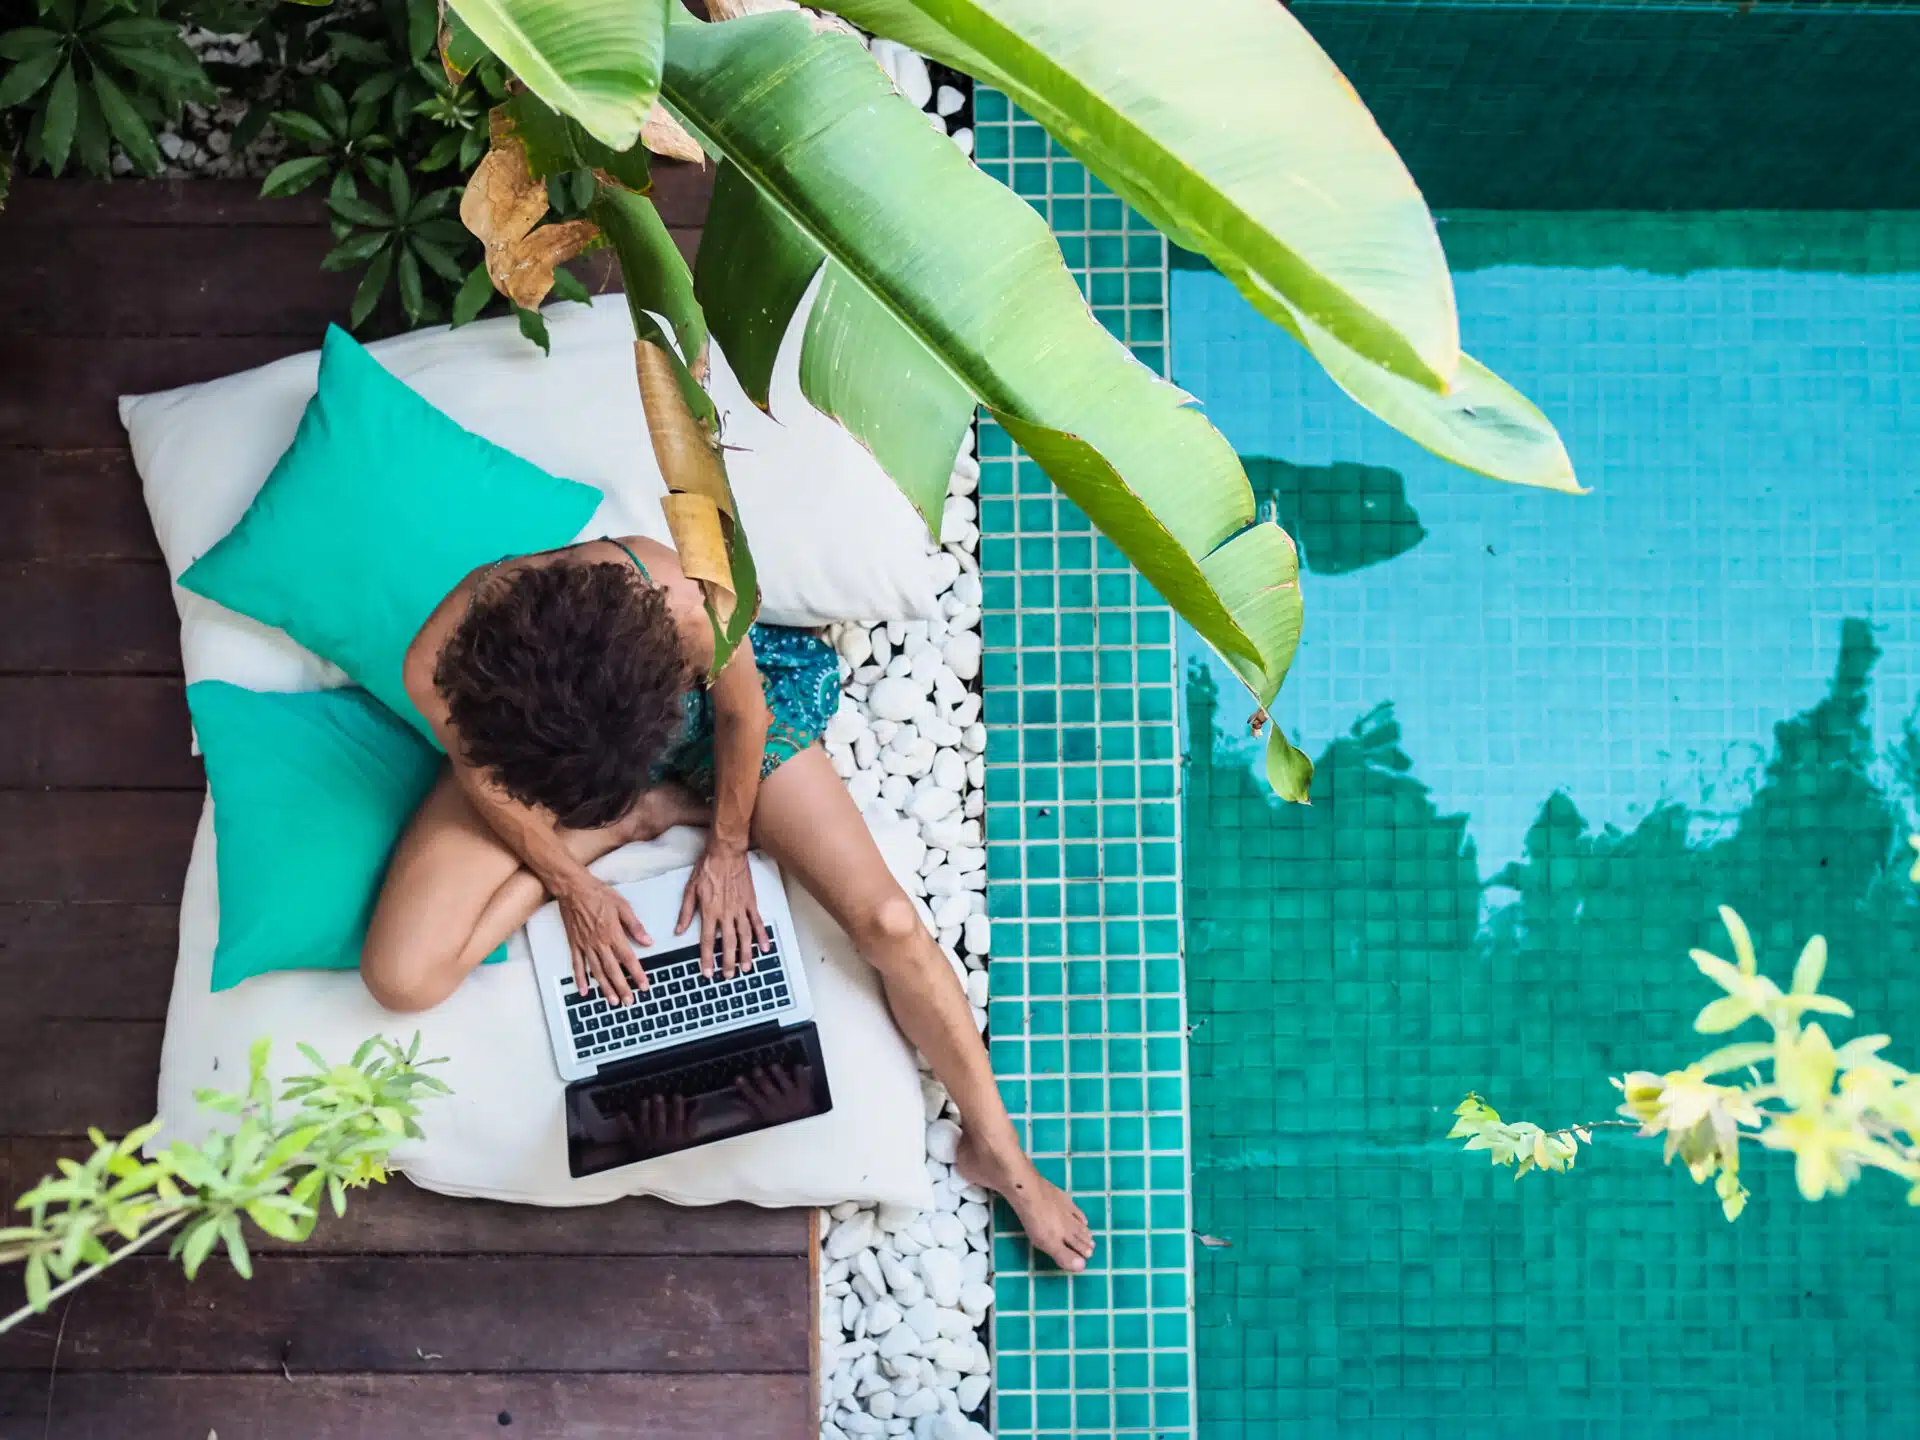 Digital nomad working by a pool